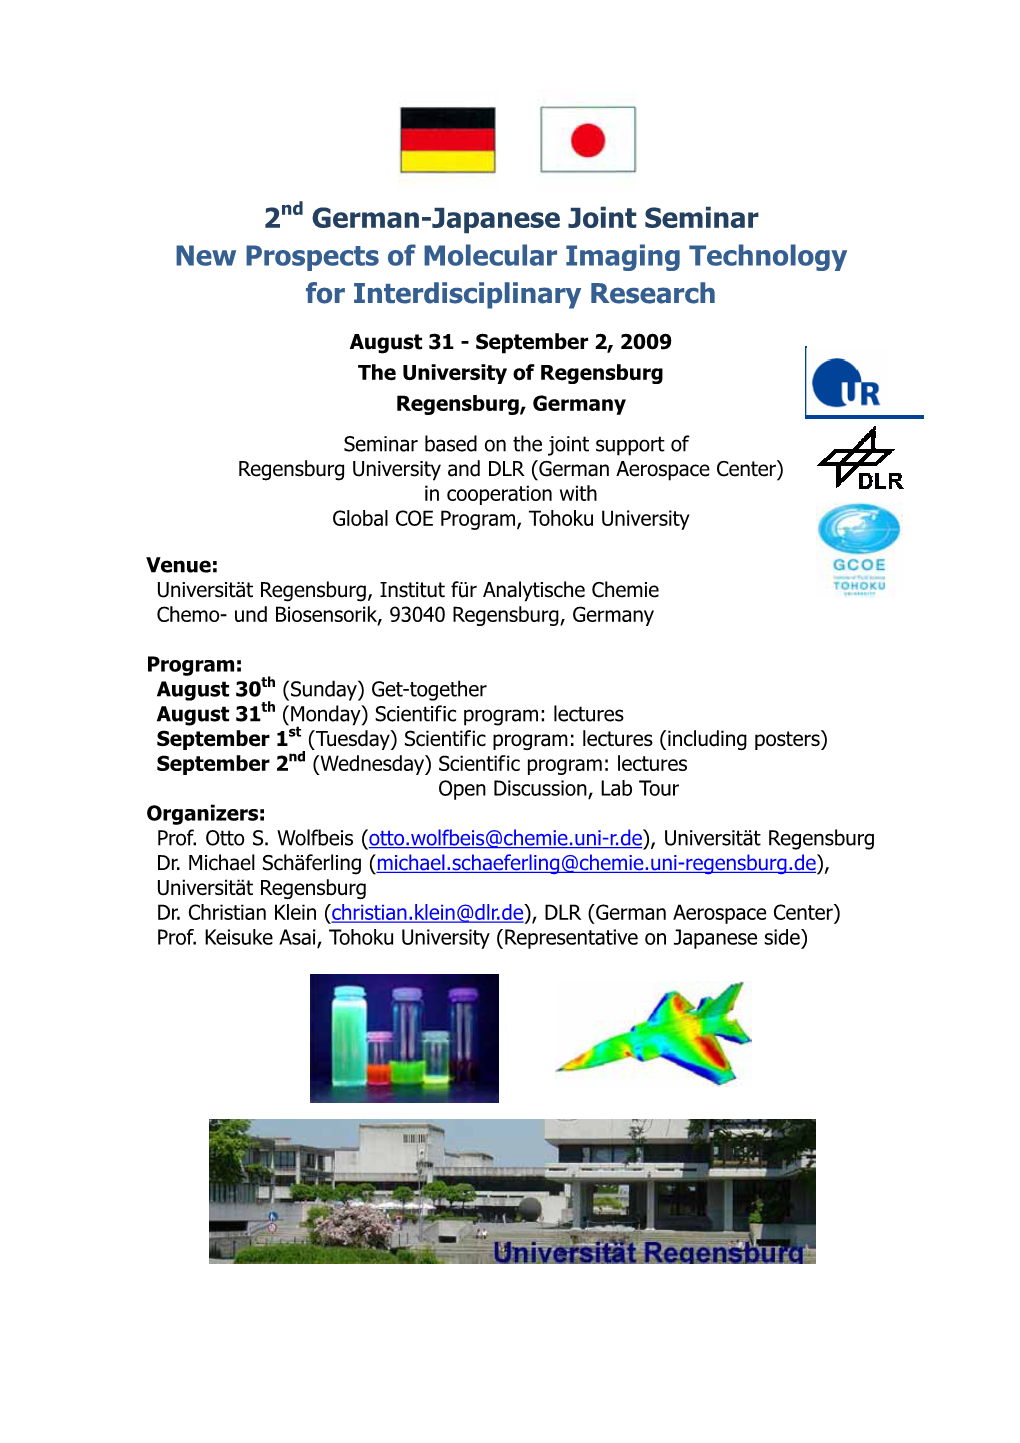 2Nd German-Japanese Joint Seminar New Prospects of Molecular Imaging Technology for Interdisciplinary Research